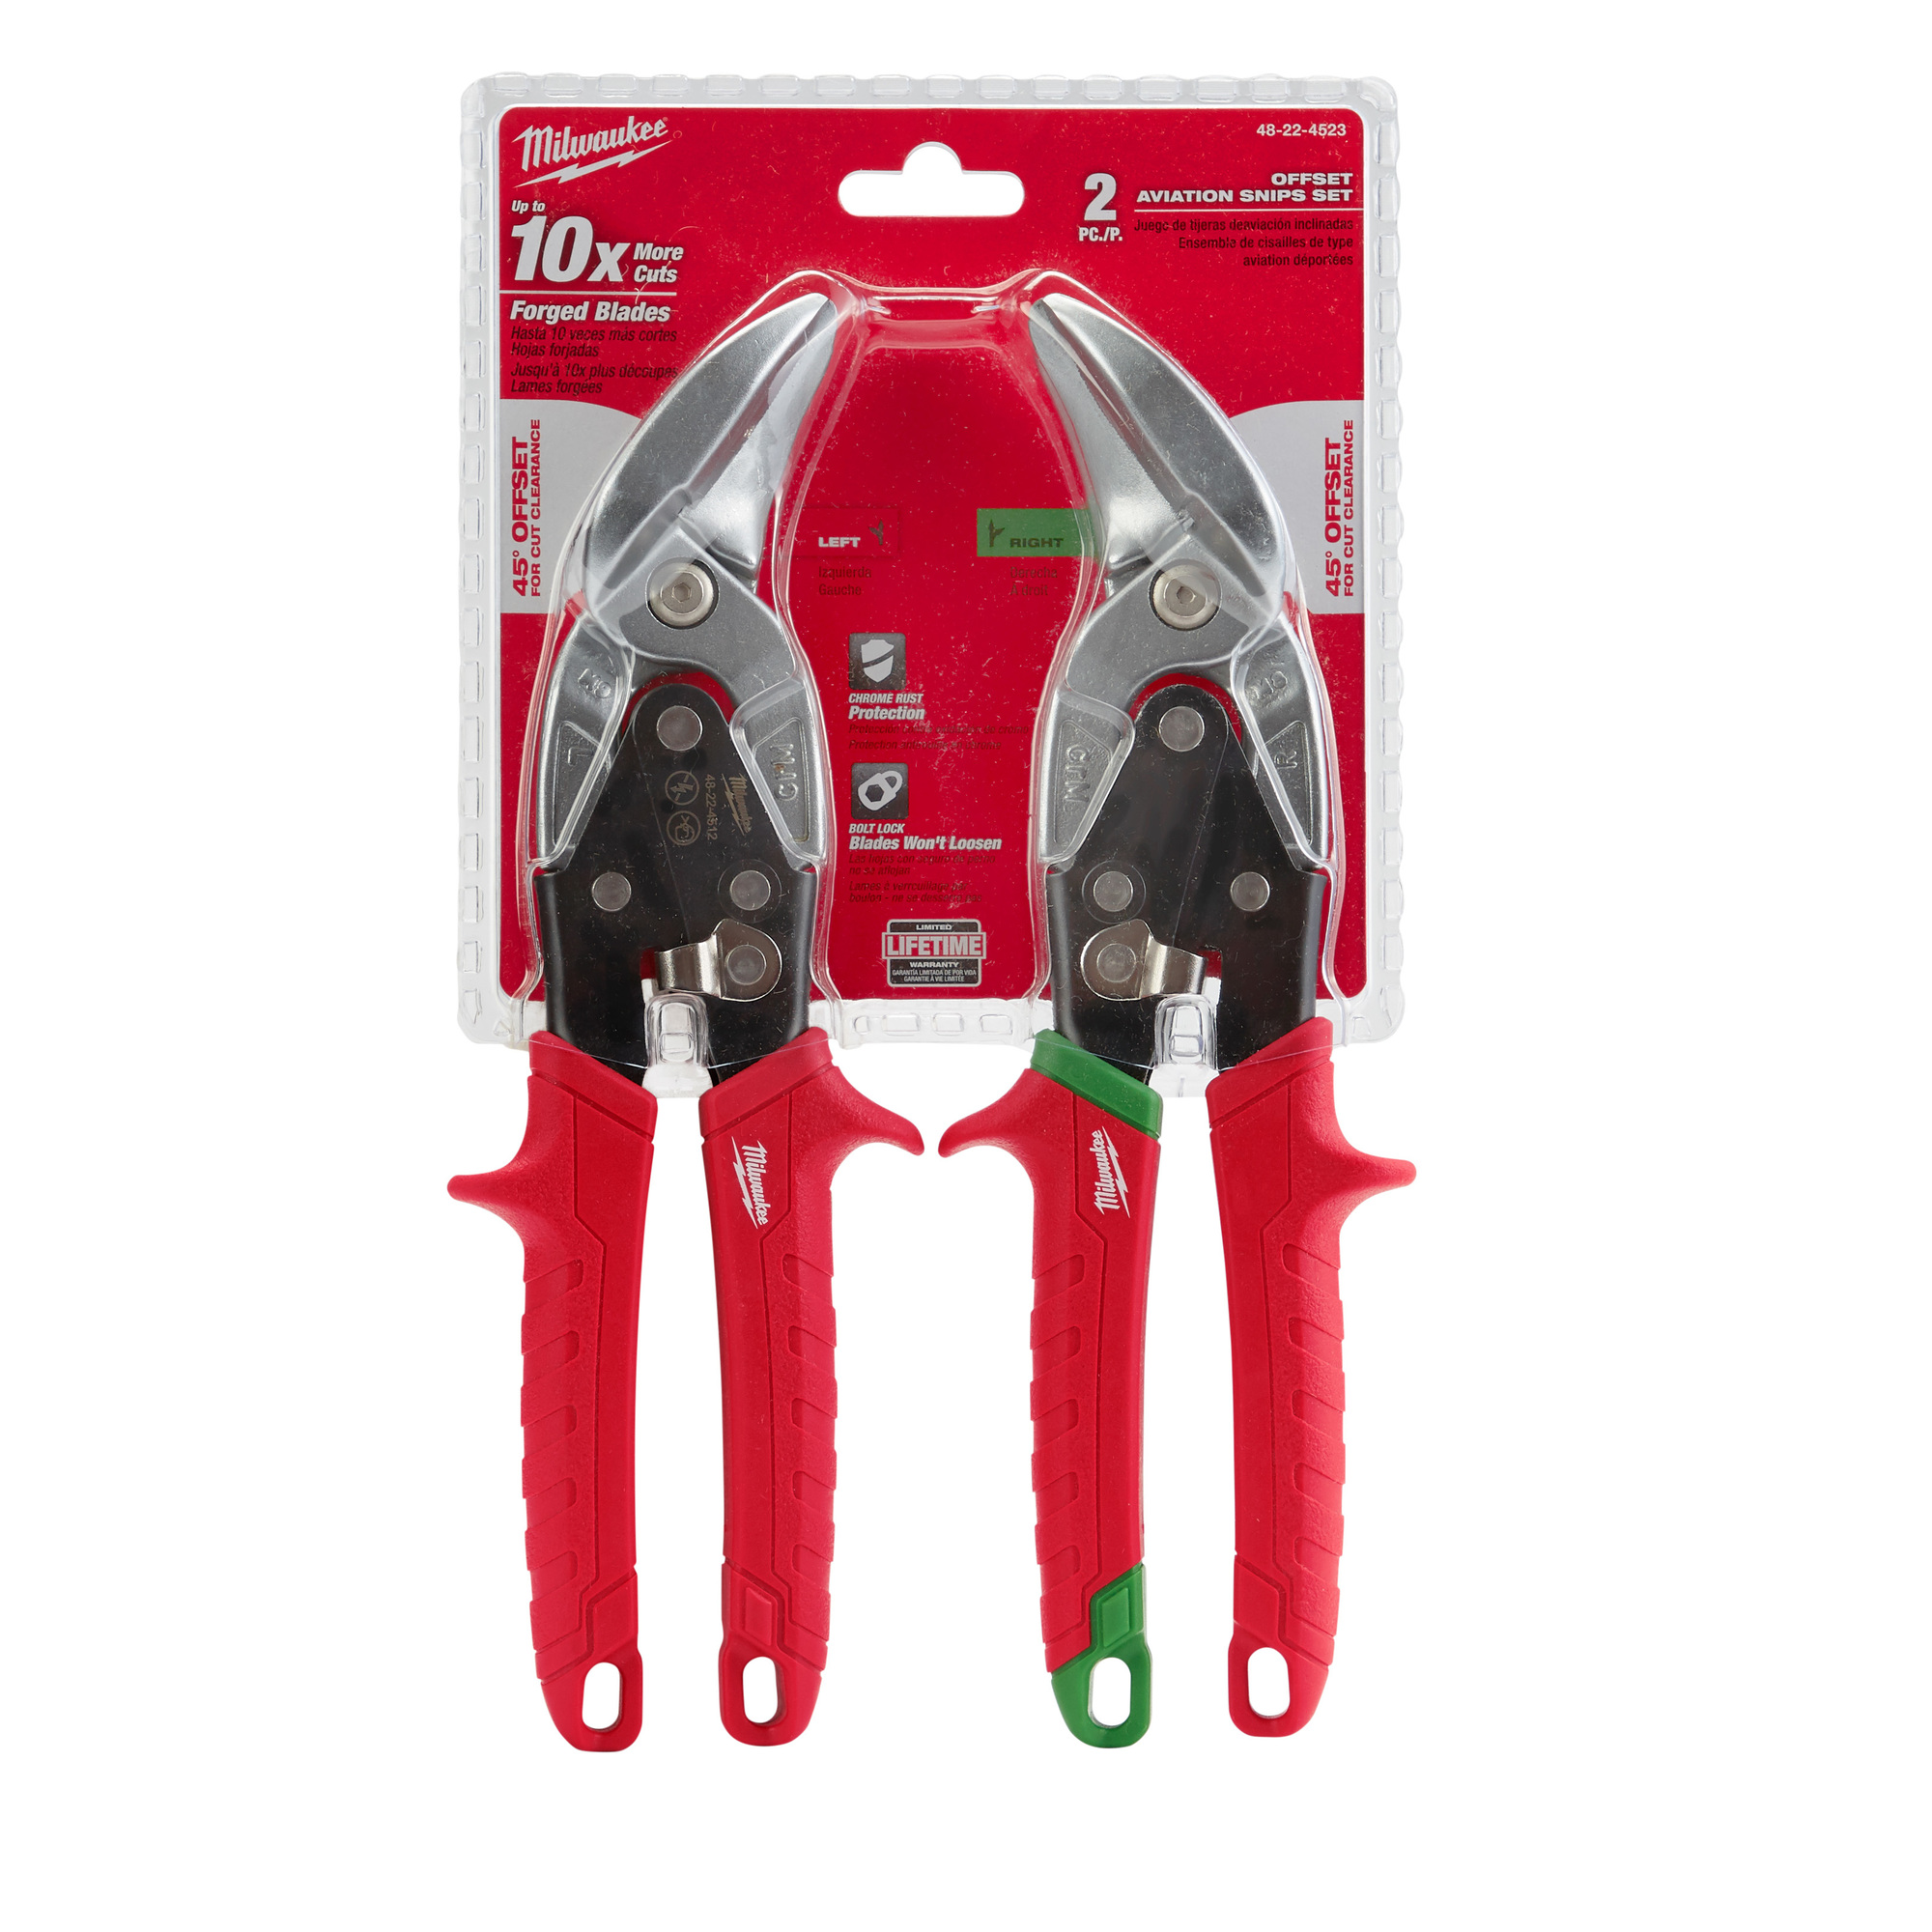 Milwaukee, 2 PC Offset Aviation Snip Set, Blade Size 5 in, Tool Length 11.45 in, Model 48-22-4523